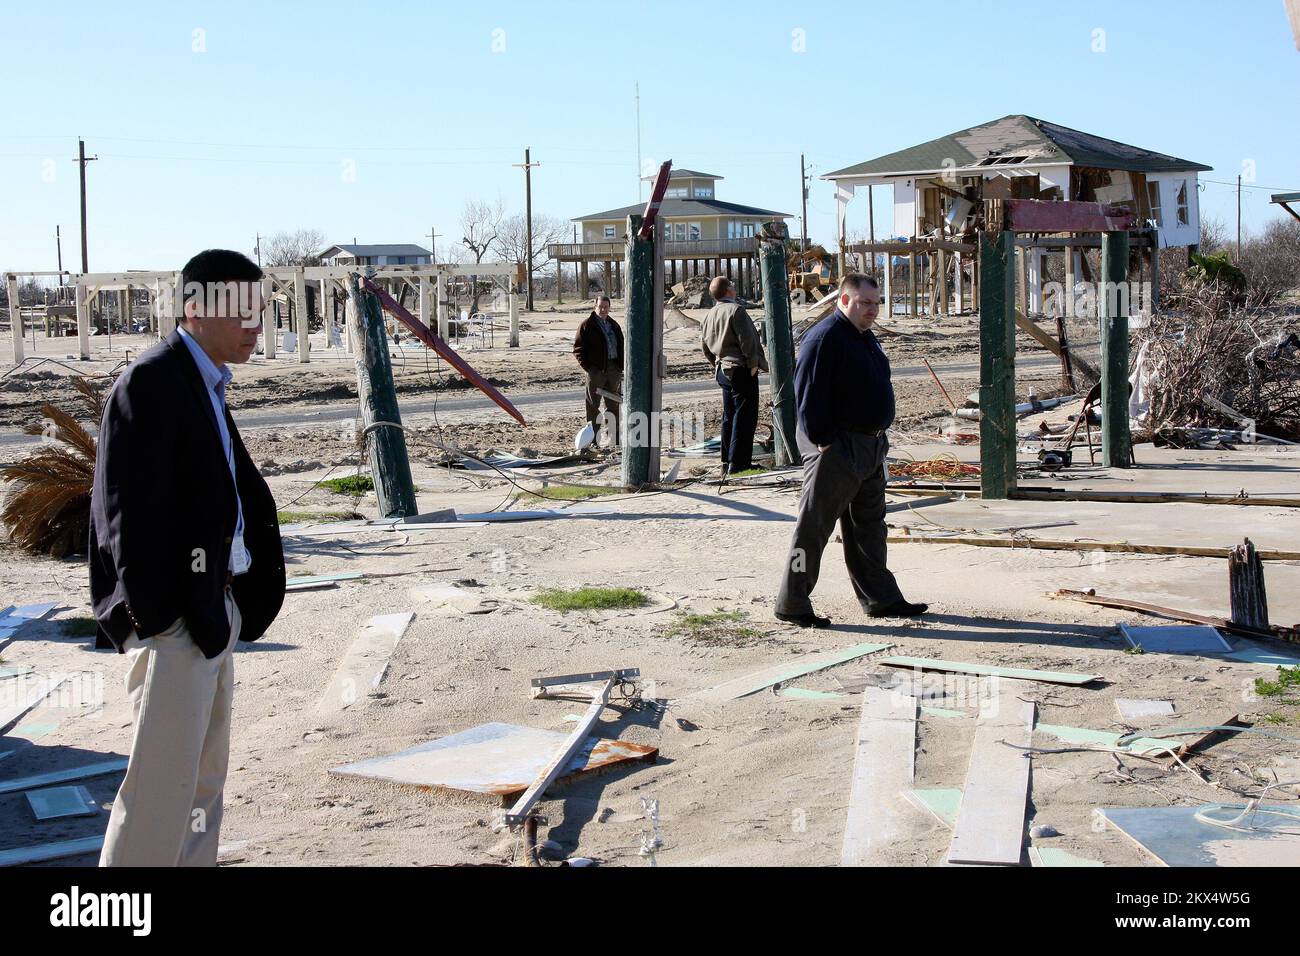 Hurricane/Tropical Storm - Bolivar, Texas, January 12, 2009   Chief Financial Officer Norman Dong (left) surveys damage to a community in Bolivar, Texas while touring the area with representatives from FEMA in Galveston. This beach front neighborhood was destroyed by Hurricane Ike and remains in ruins. Robert Kaufmann/FEMA. Texas Hurricane Ike. Photographs Relating to Disasters and Emergency Management Programs, Activities, and Officials Stock Photo